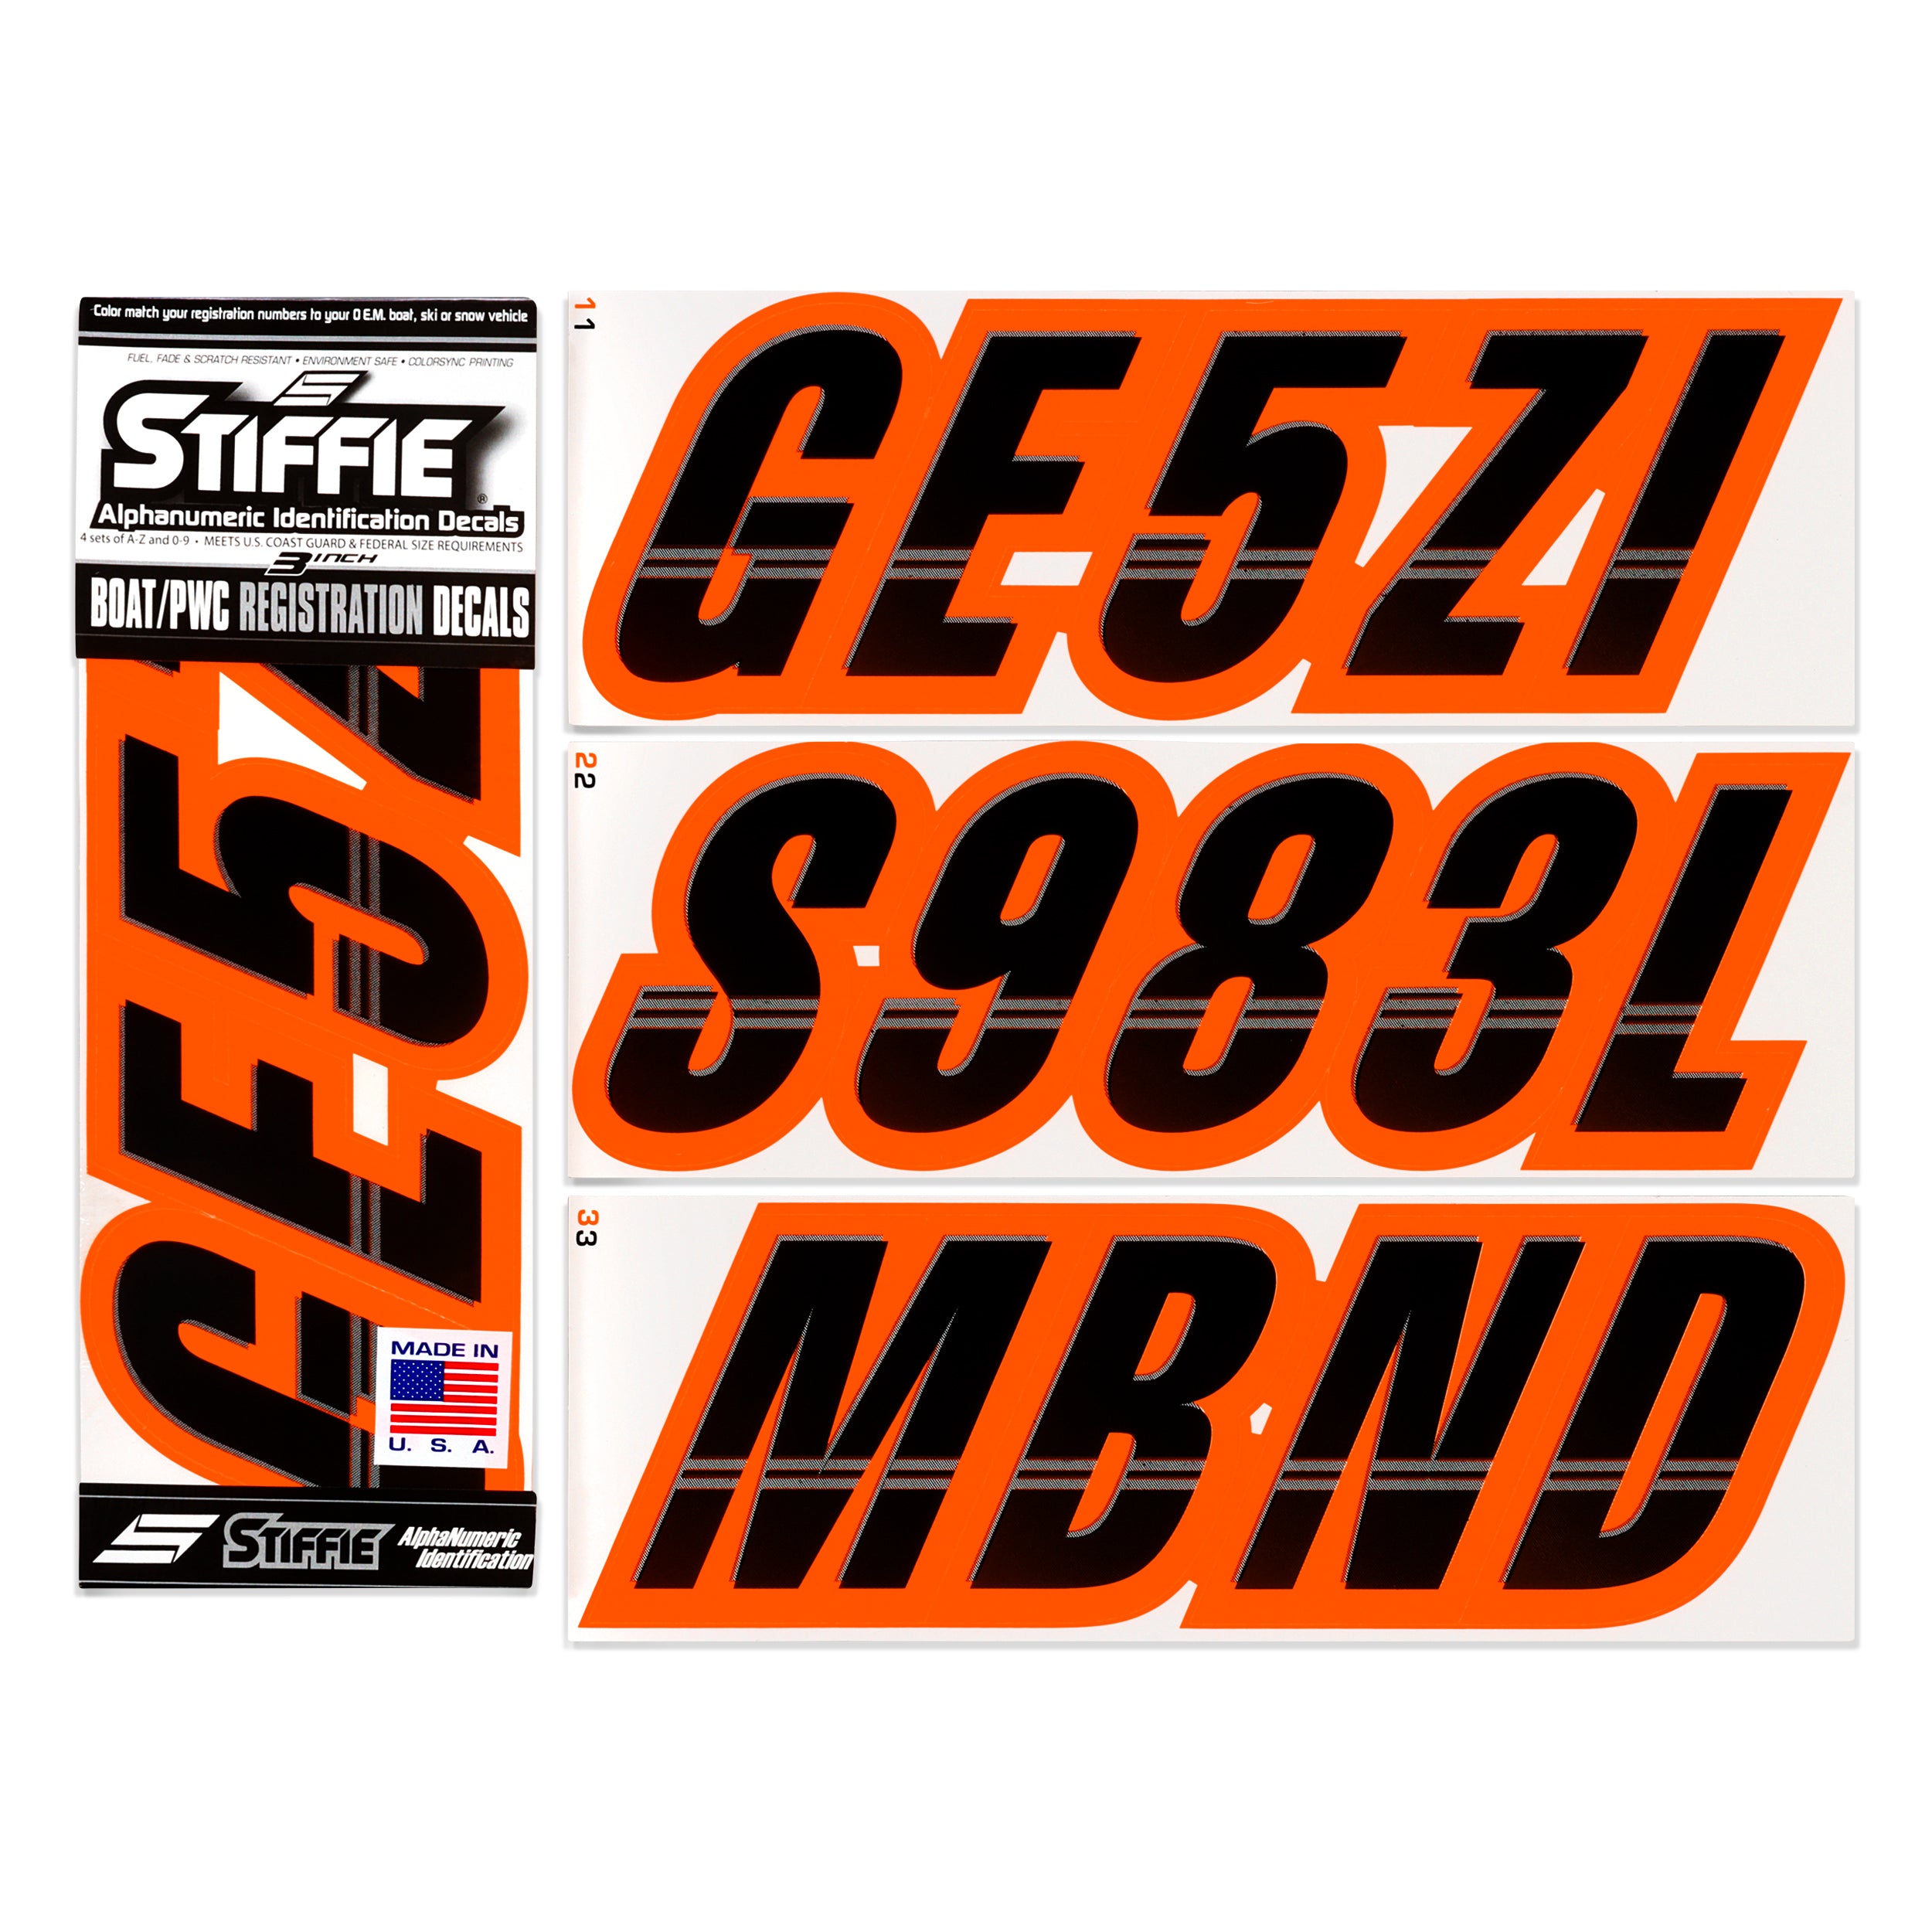 STIFFIE Techtron Black/Electric Orange 3" Alpha-Numeric Registration Identification Numbers Stickers Decals for Boats & Personal Watercraft